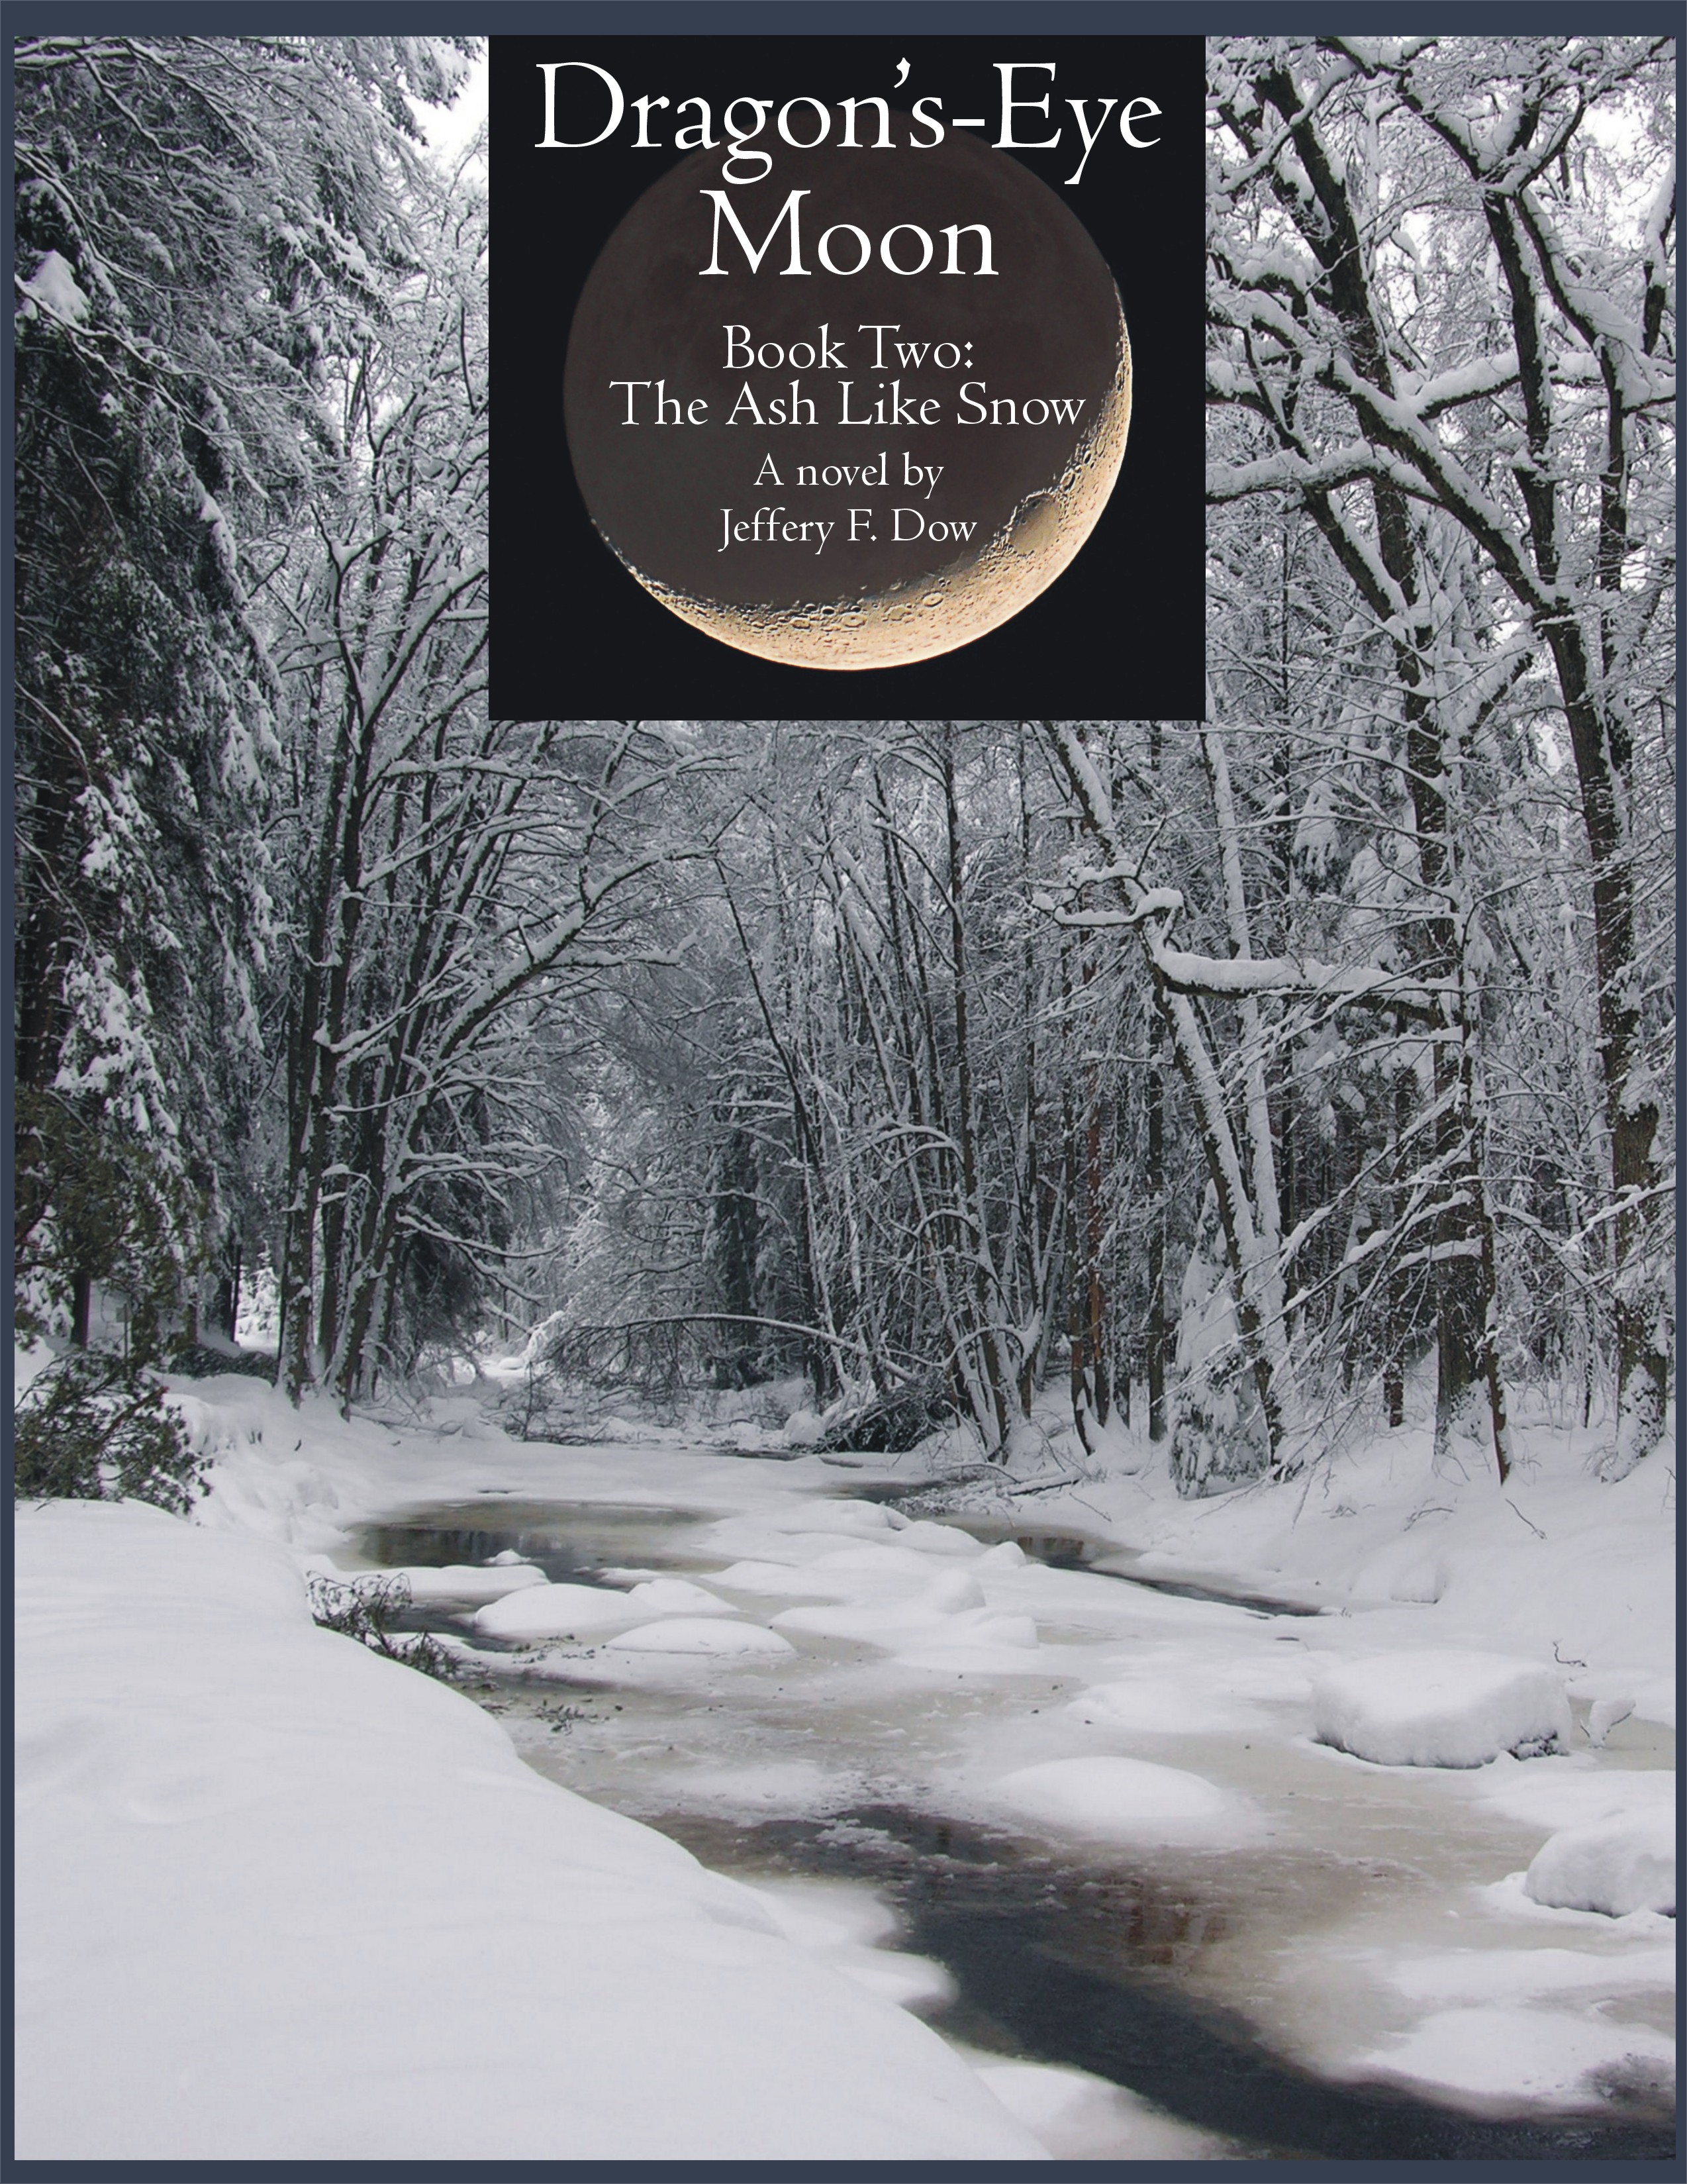 Cover of a book showing a nearly frozen stream surrounded by trees covered in snow